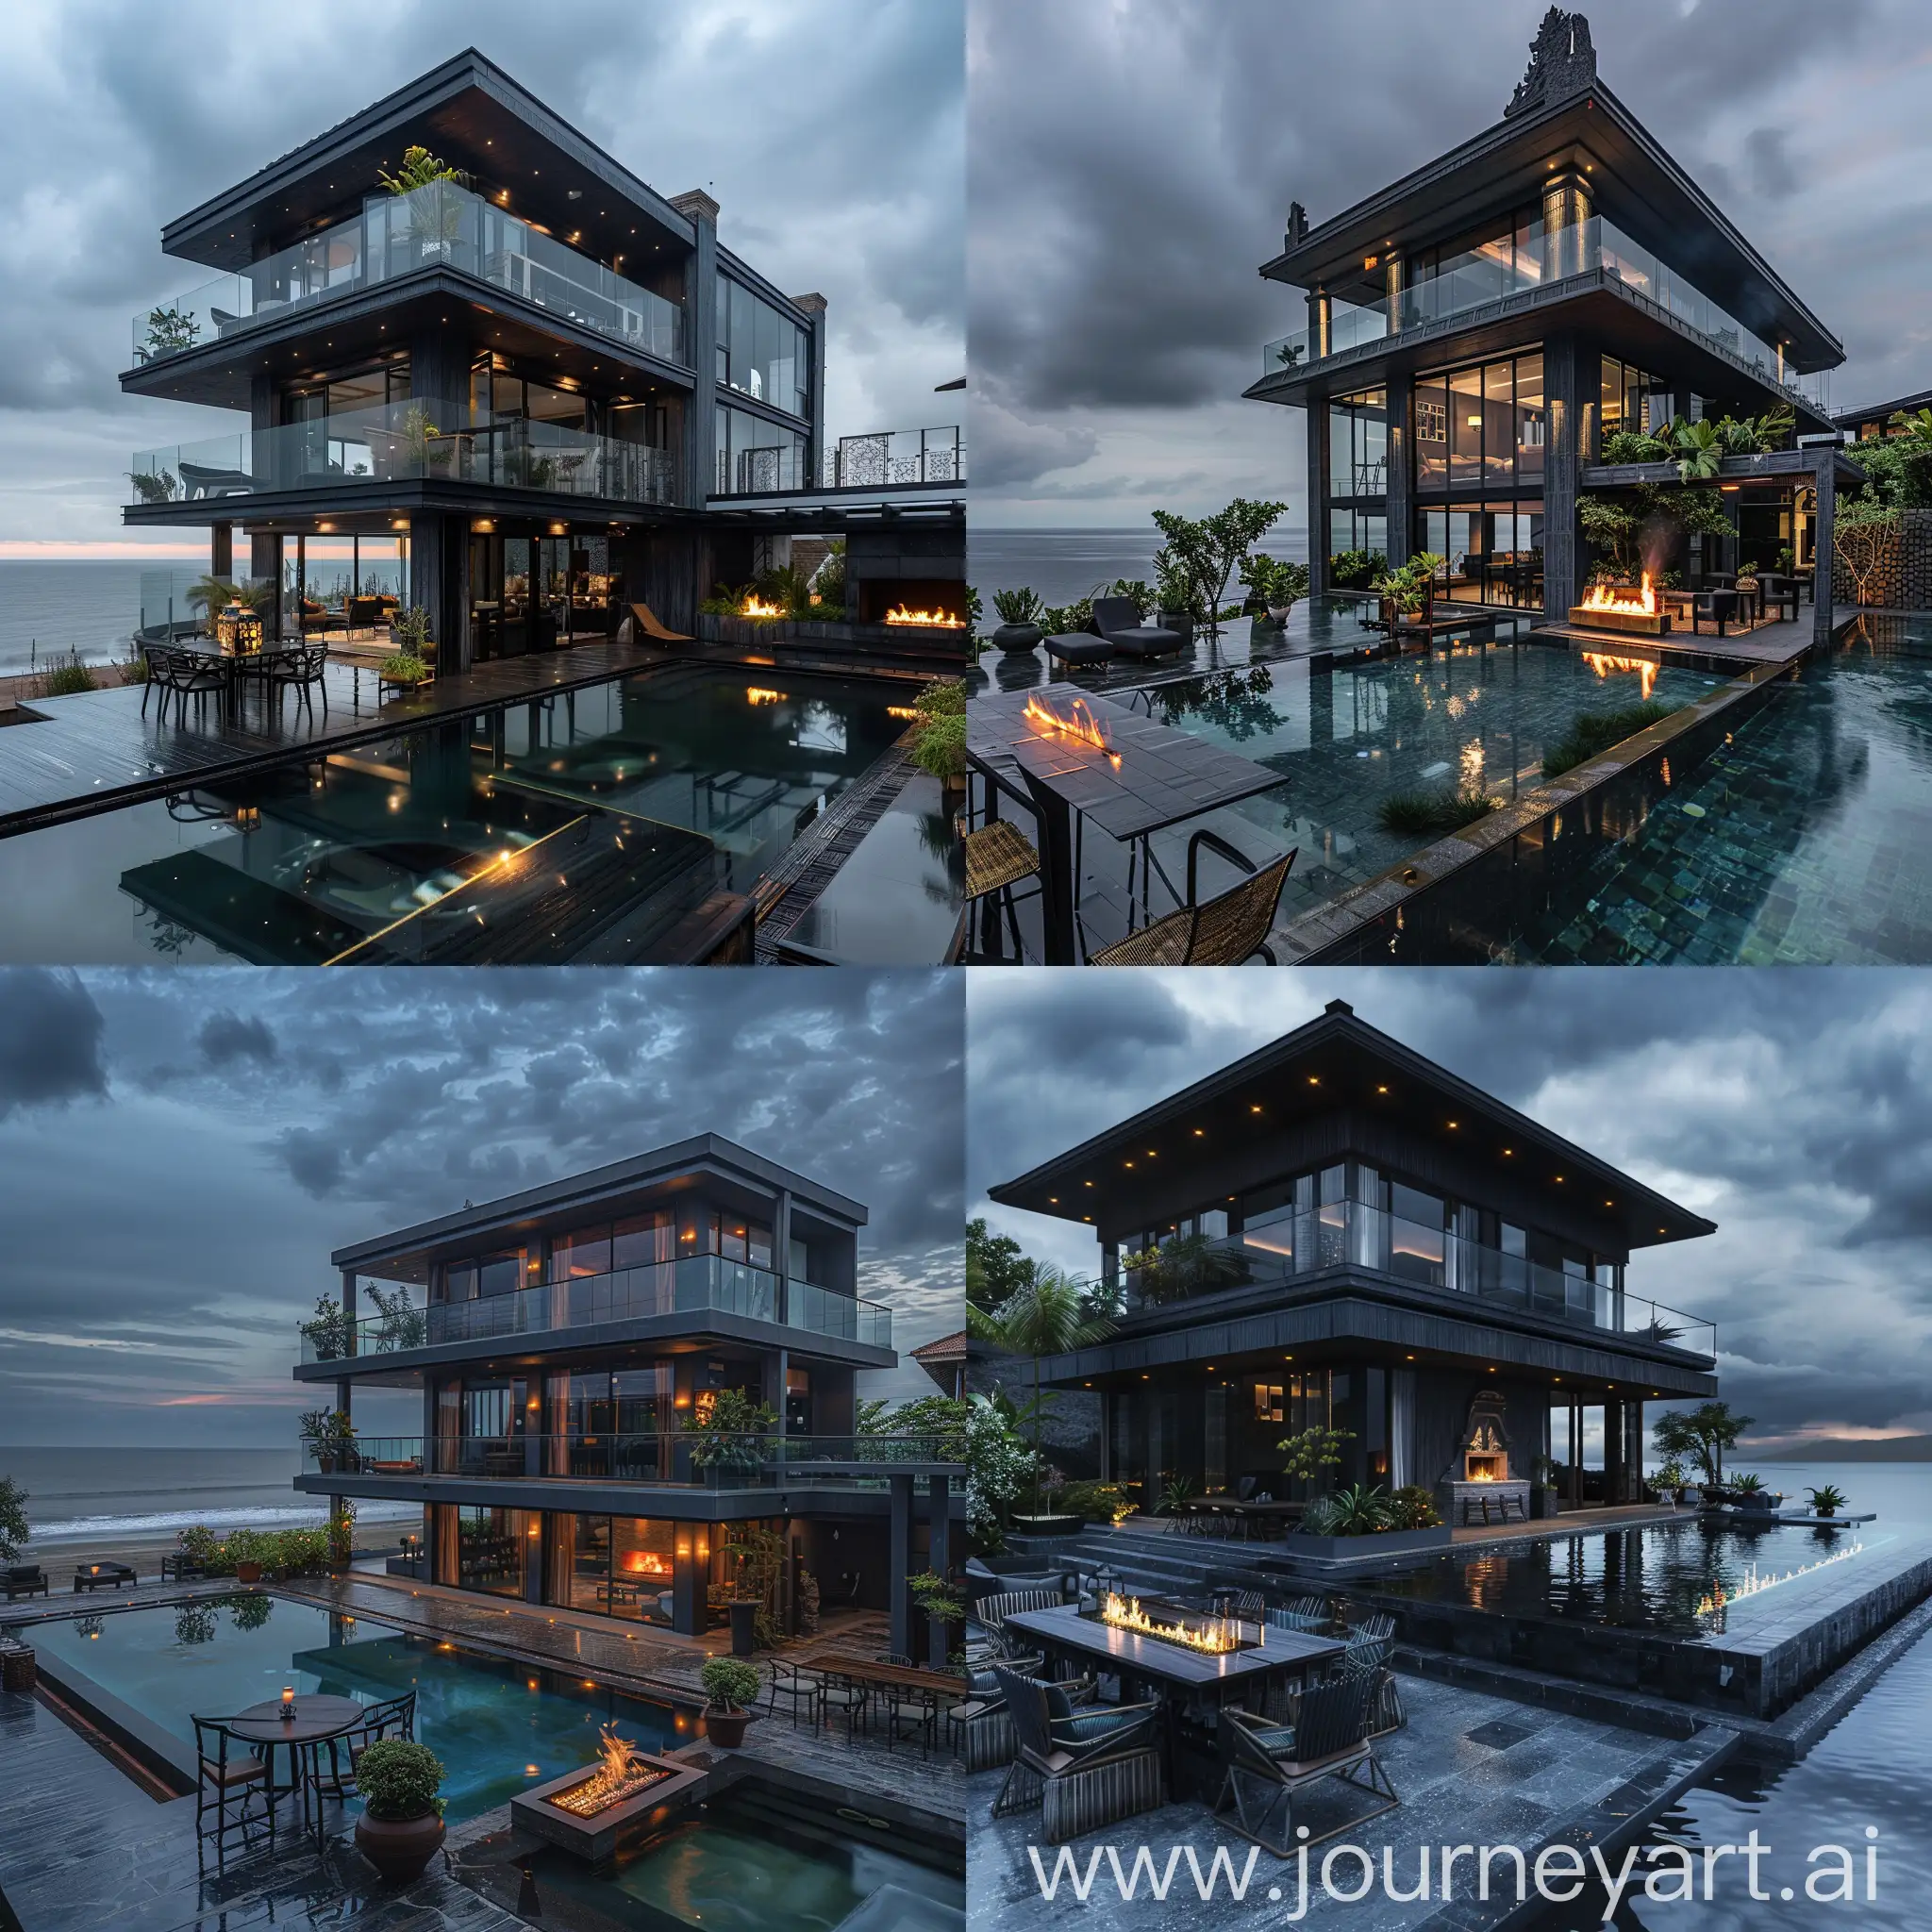 A three-story, black-grey termwood villa with a large glass infinity pool
, soft lighting, landscaped with complete arrangement, table and chairs, plants and jacuzzi, fireplace and fire temple,
 By the seashore, with cloudy weather at the end of the day, real photo